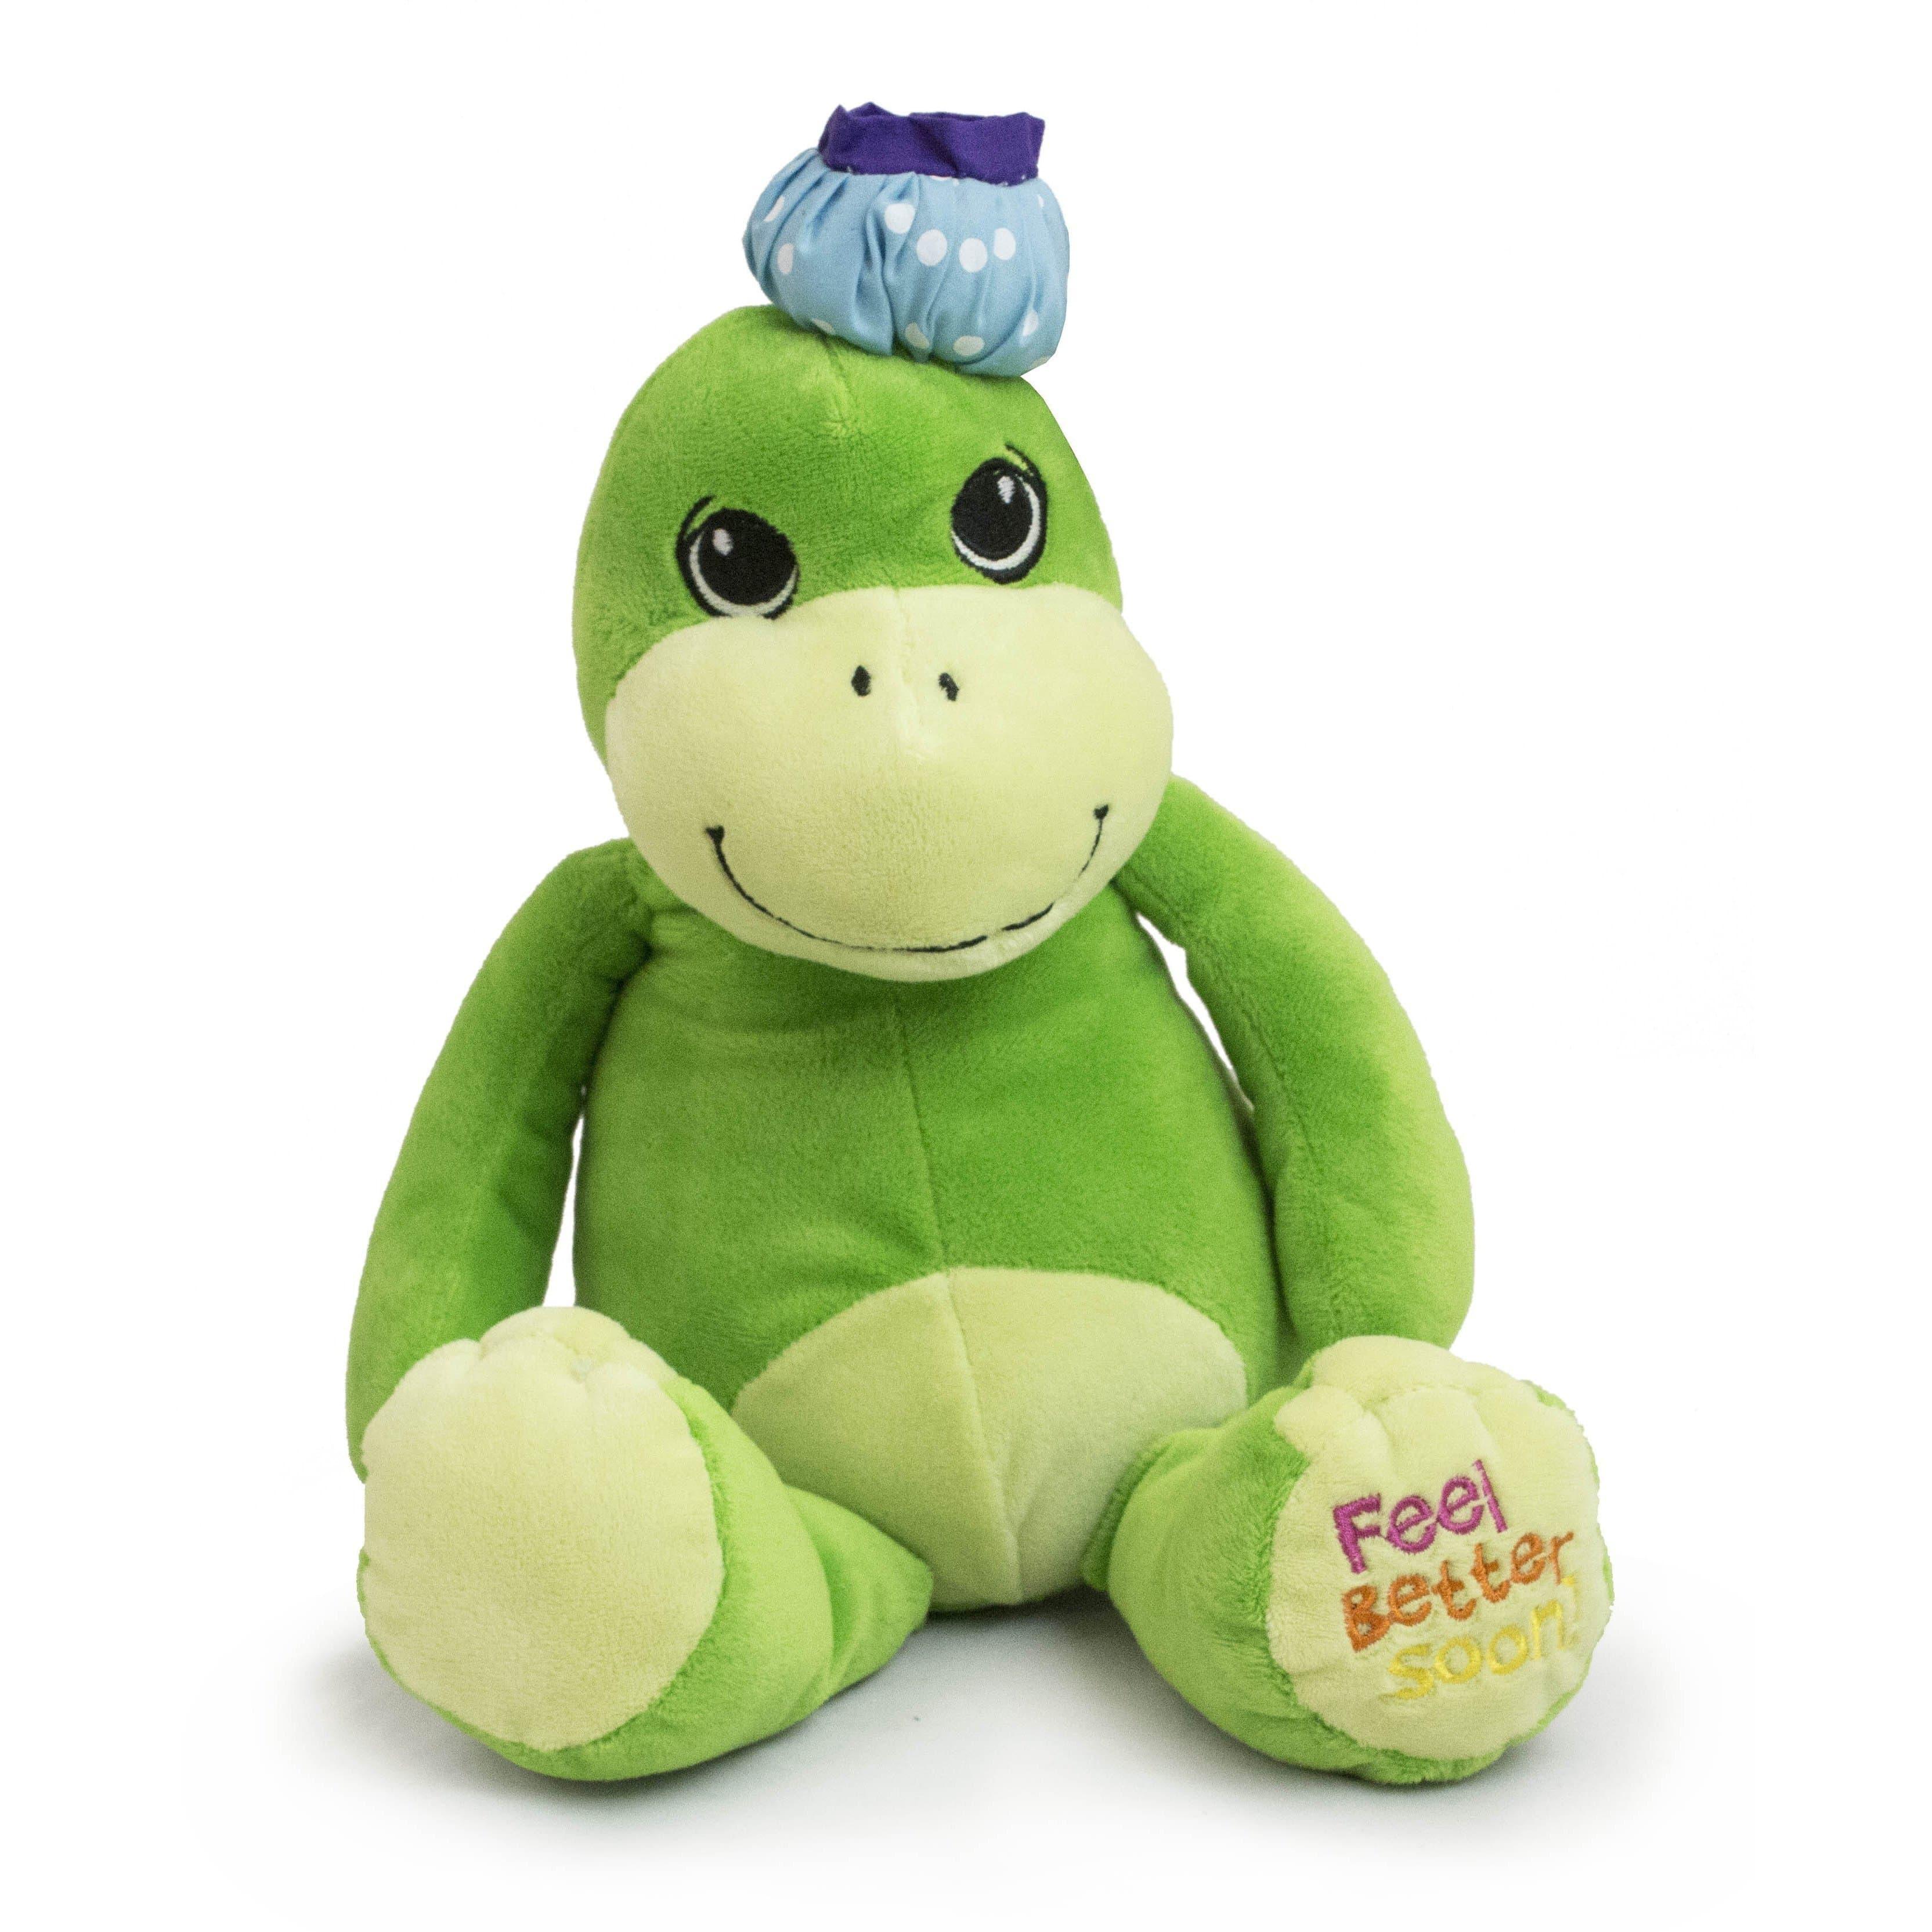 “Ducky" the 12in Green Feel Better Soon Plush Dinosaur by The Petting Zoo